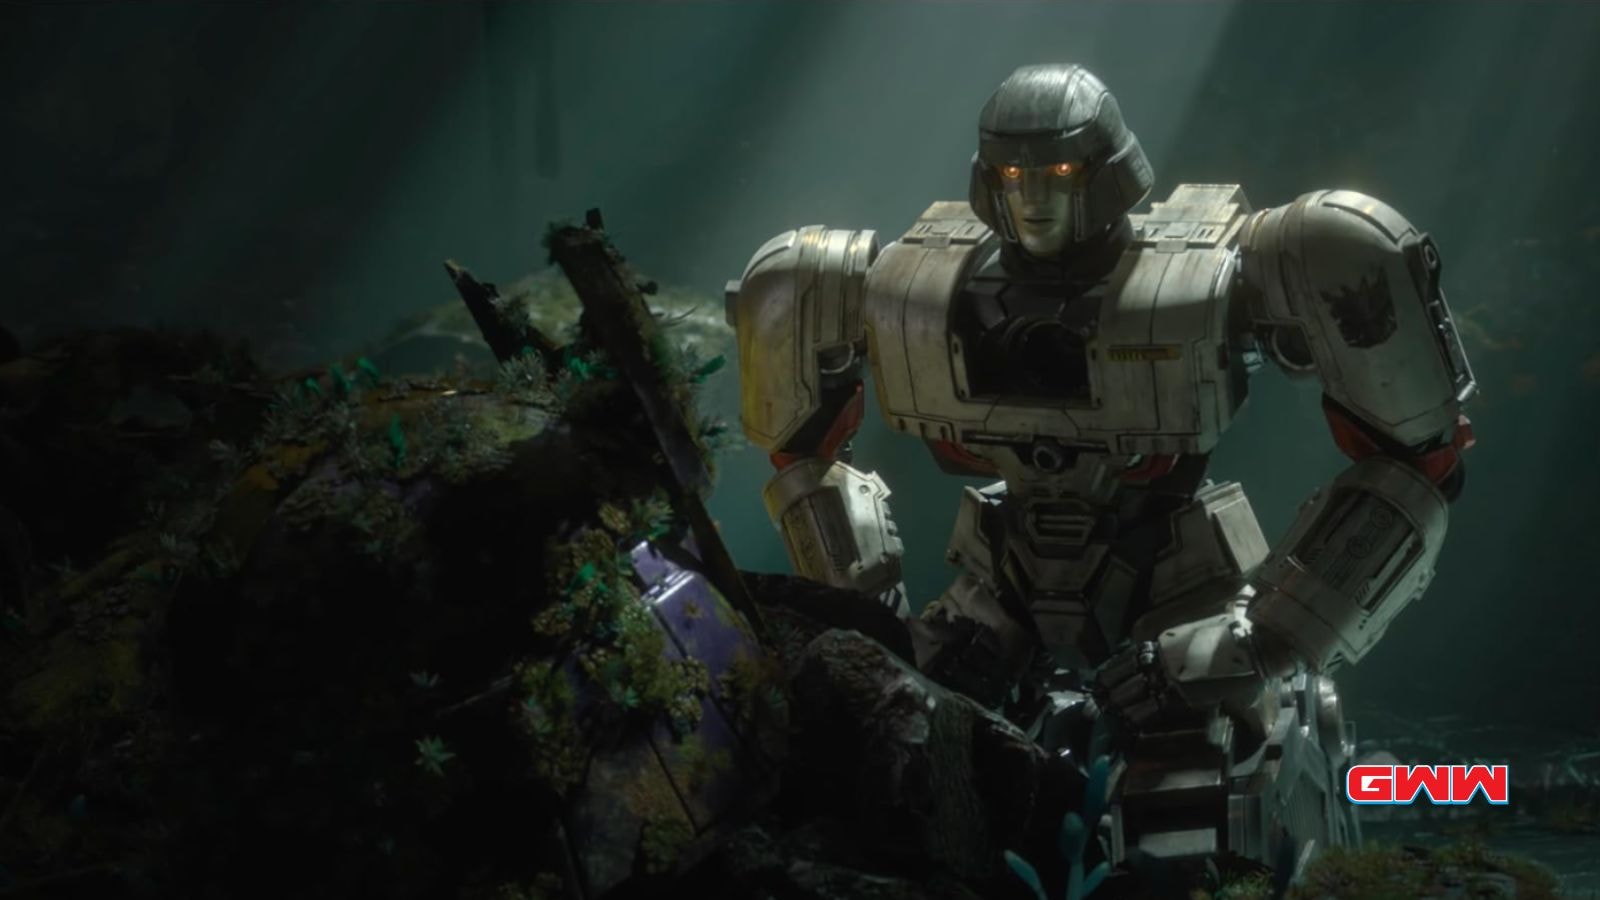 Megatron (also known as D-16), Transformers One Trailer